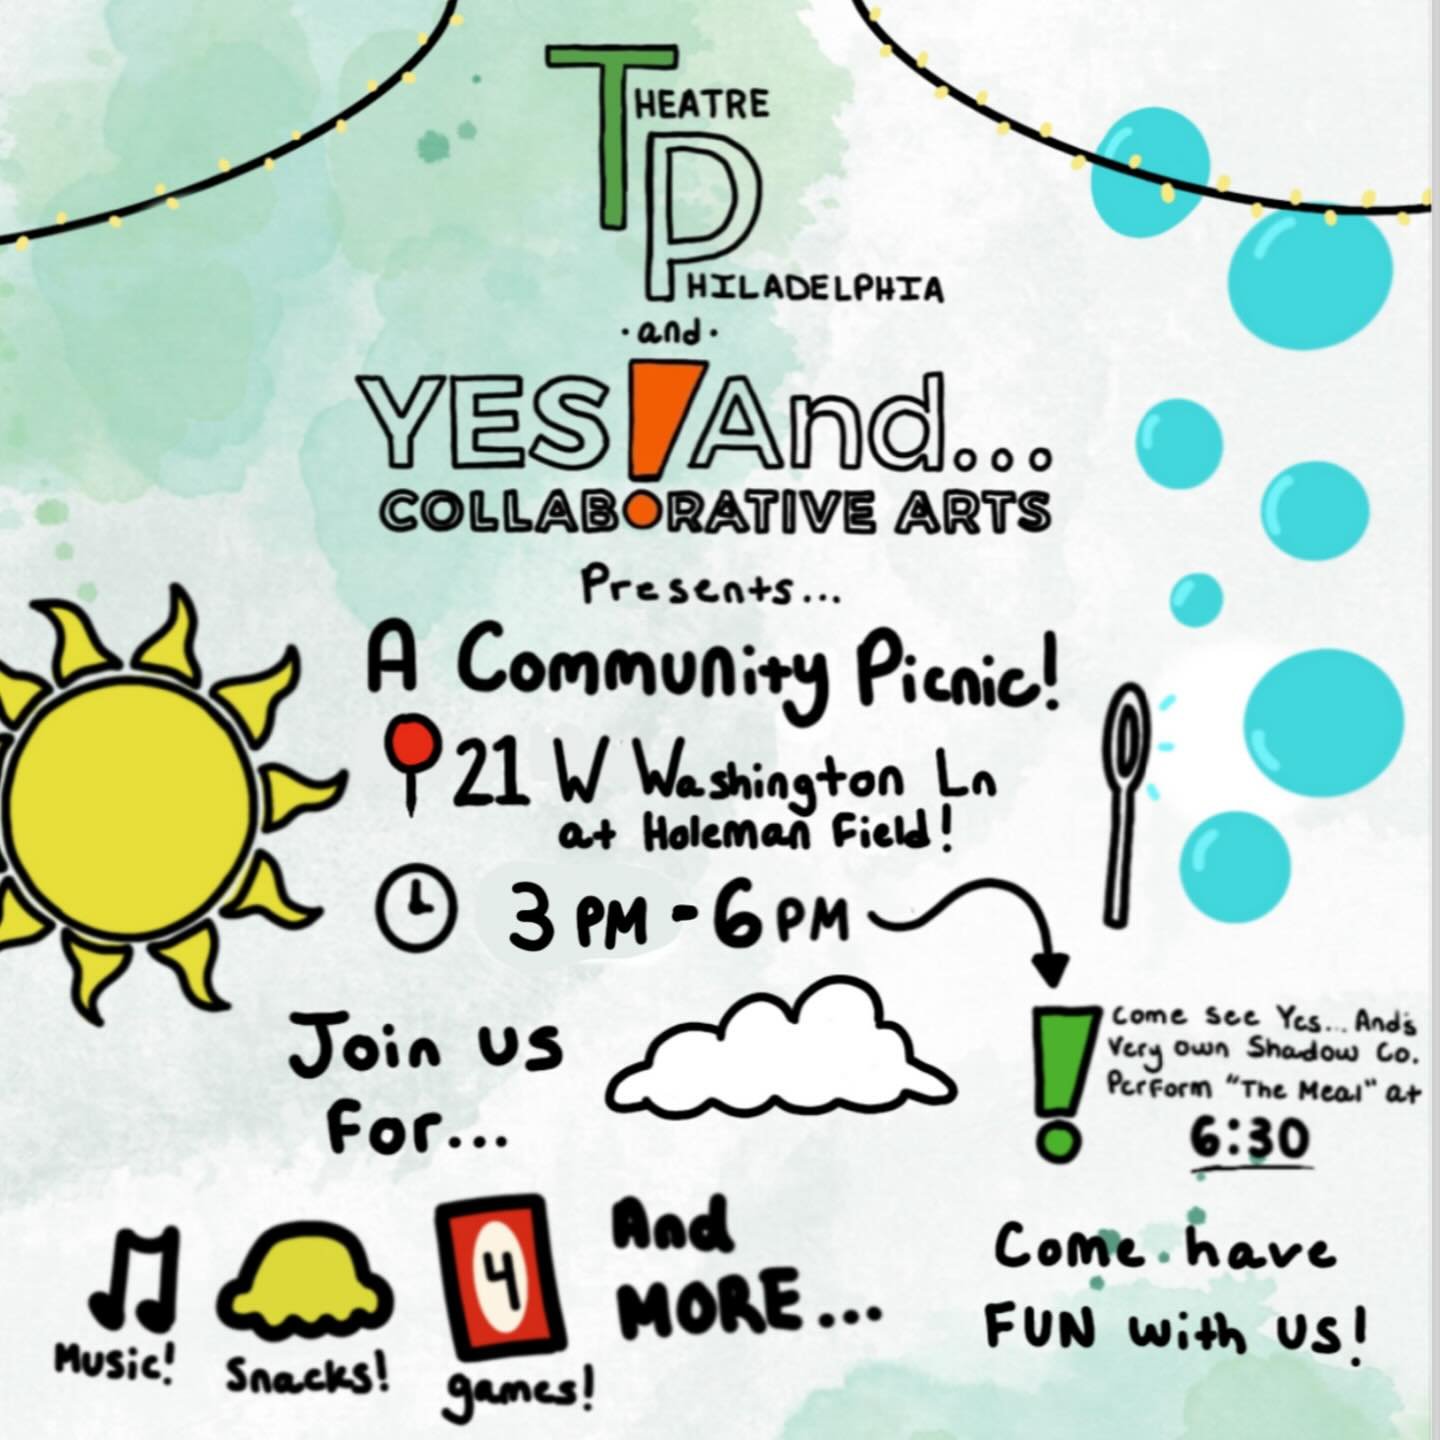 Community event alert! Join us and @theatrephiladelphia for the Theatre Week Community Picnic on Saturday April 13th from 3-6pm! 

Come out to enjoy live music, indoor/outdoor games, a craft circle, and a free book exchange. Pre-registration is encou